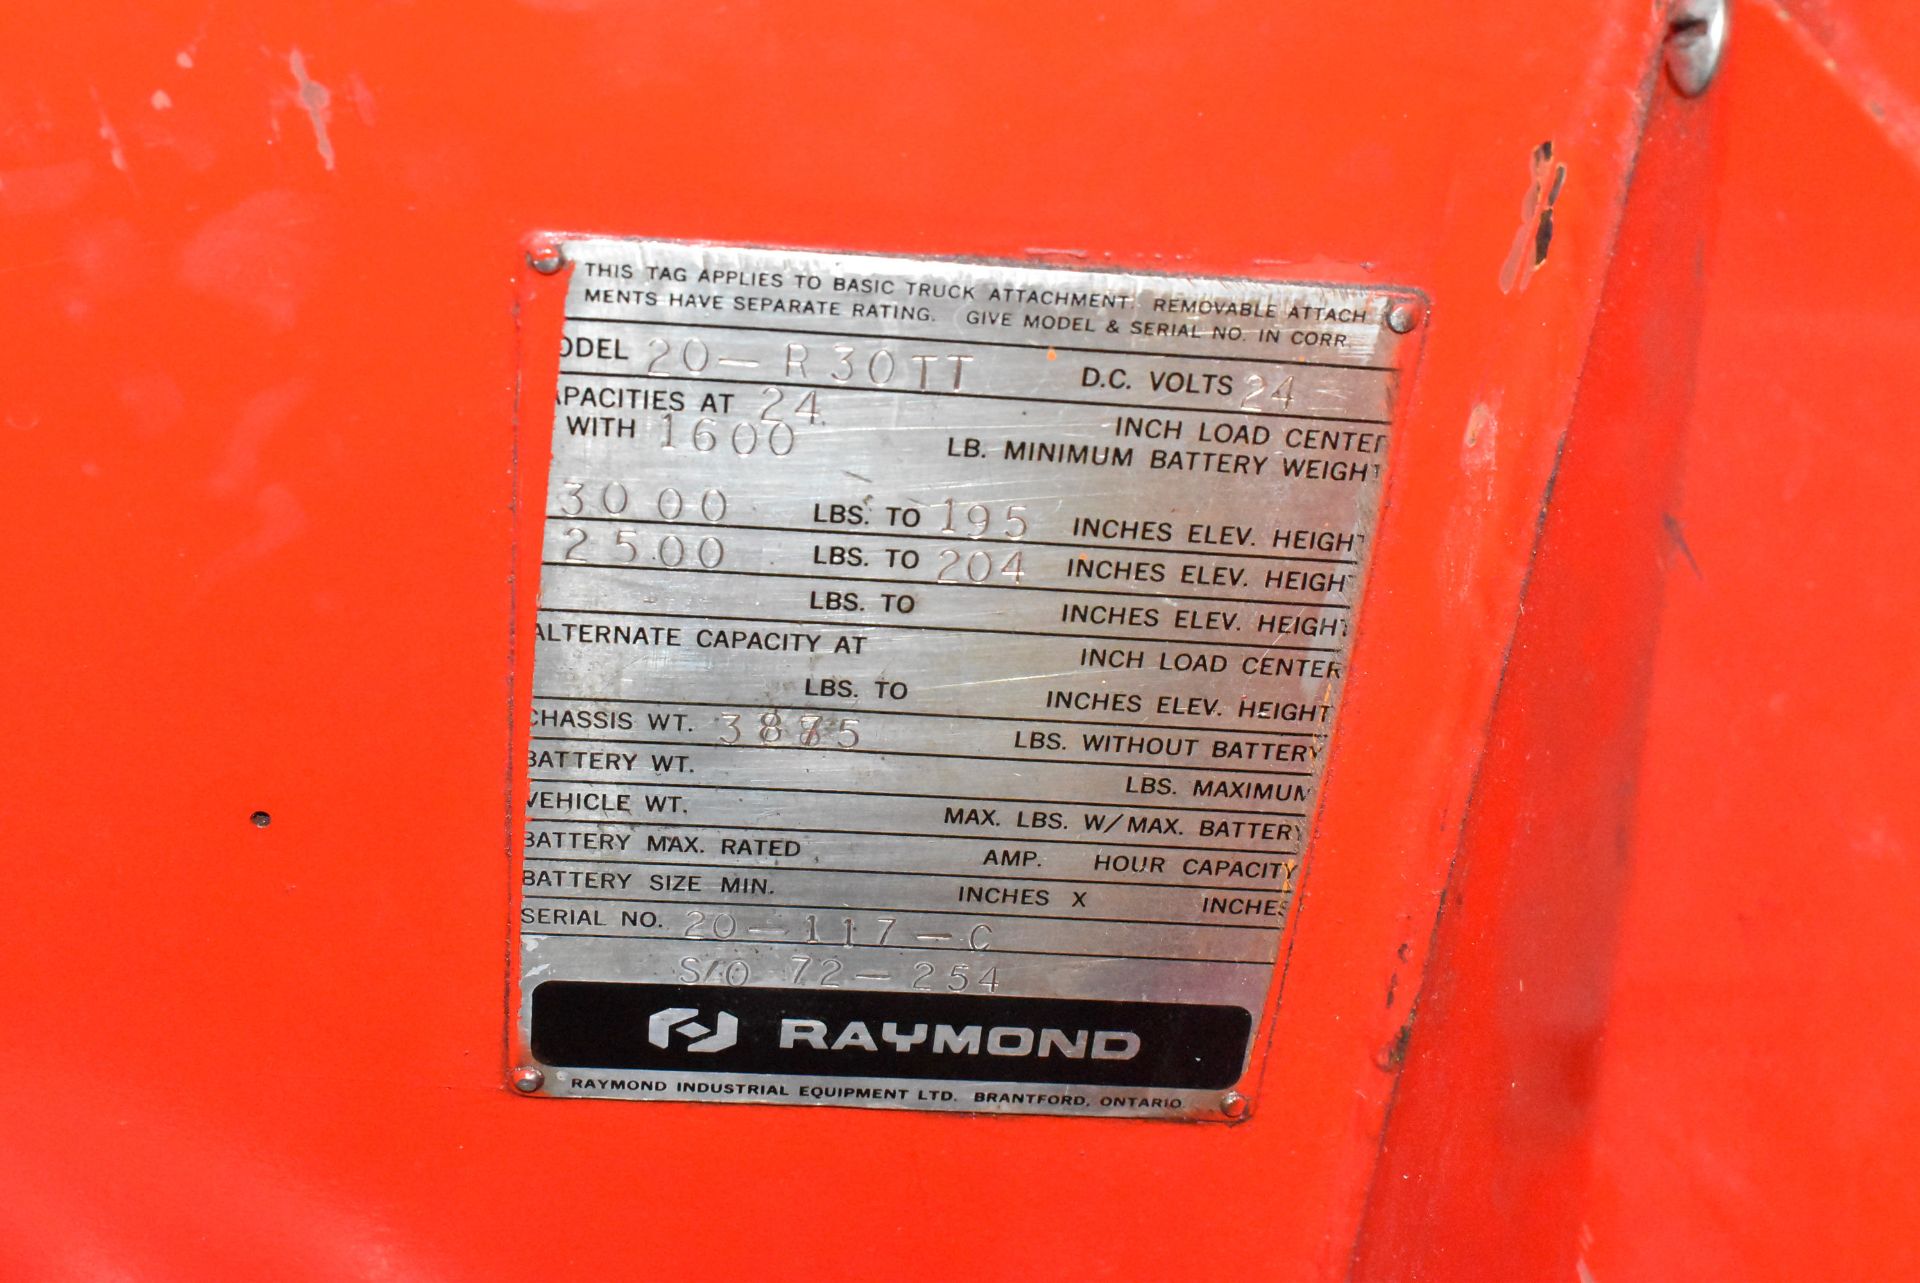 RAYMOND 20-R30TT 24V ELECTRIC REACH TRUCK WITH 3,000 LBS CAPACITY, 195" MAX VERTICAL REACH, 1,173 - Image 7 of 7